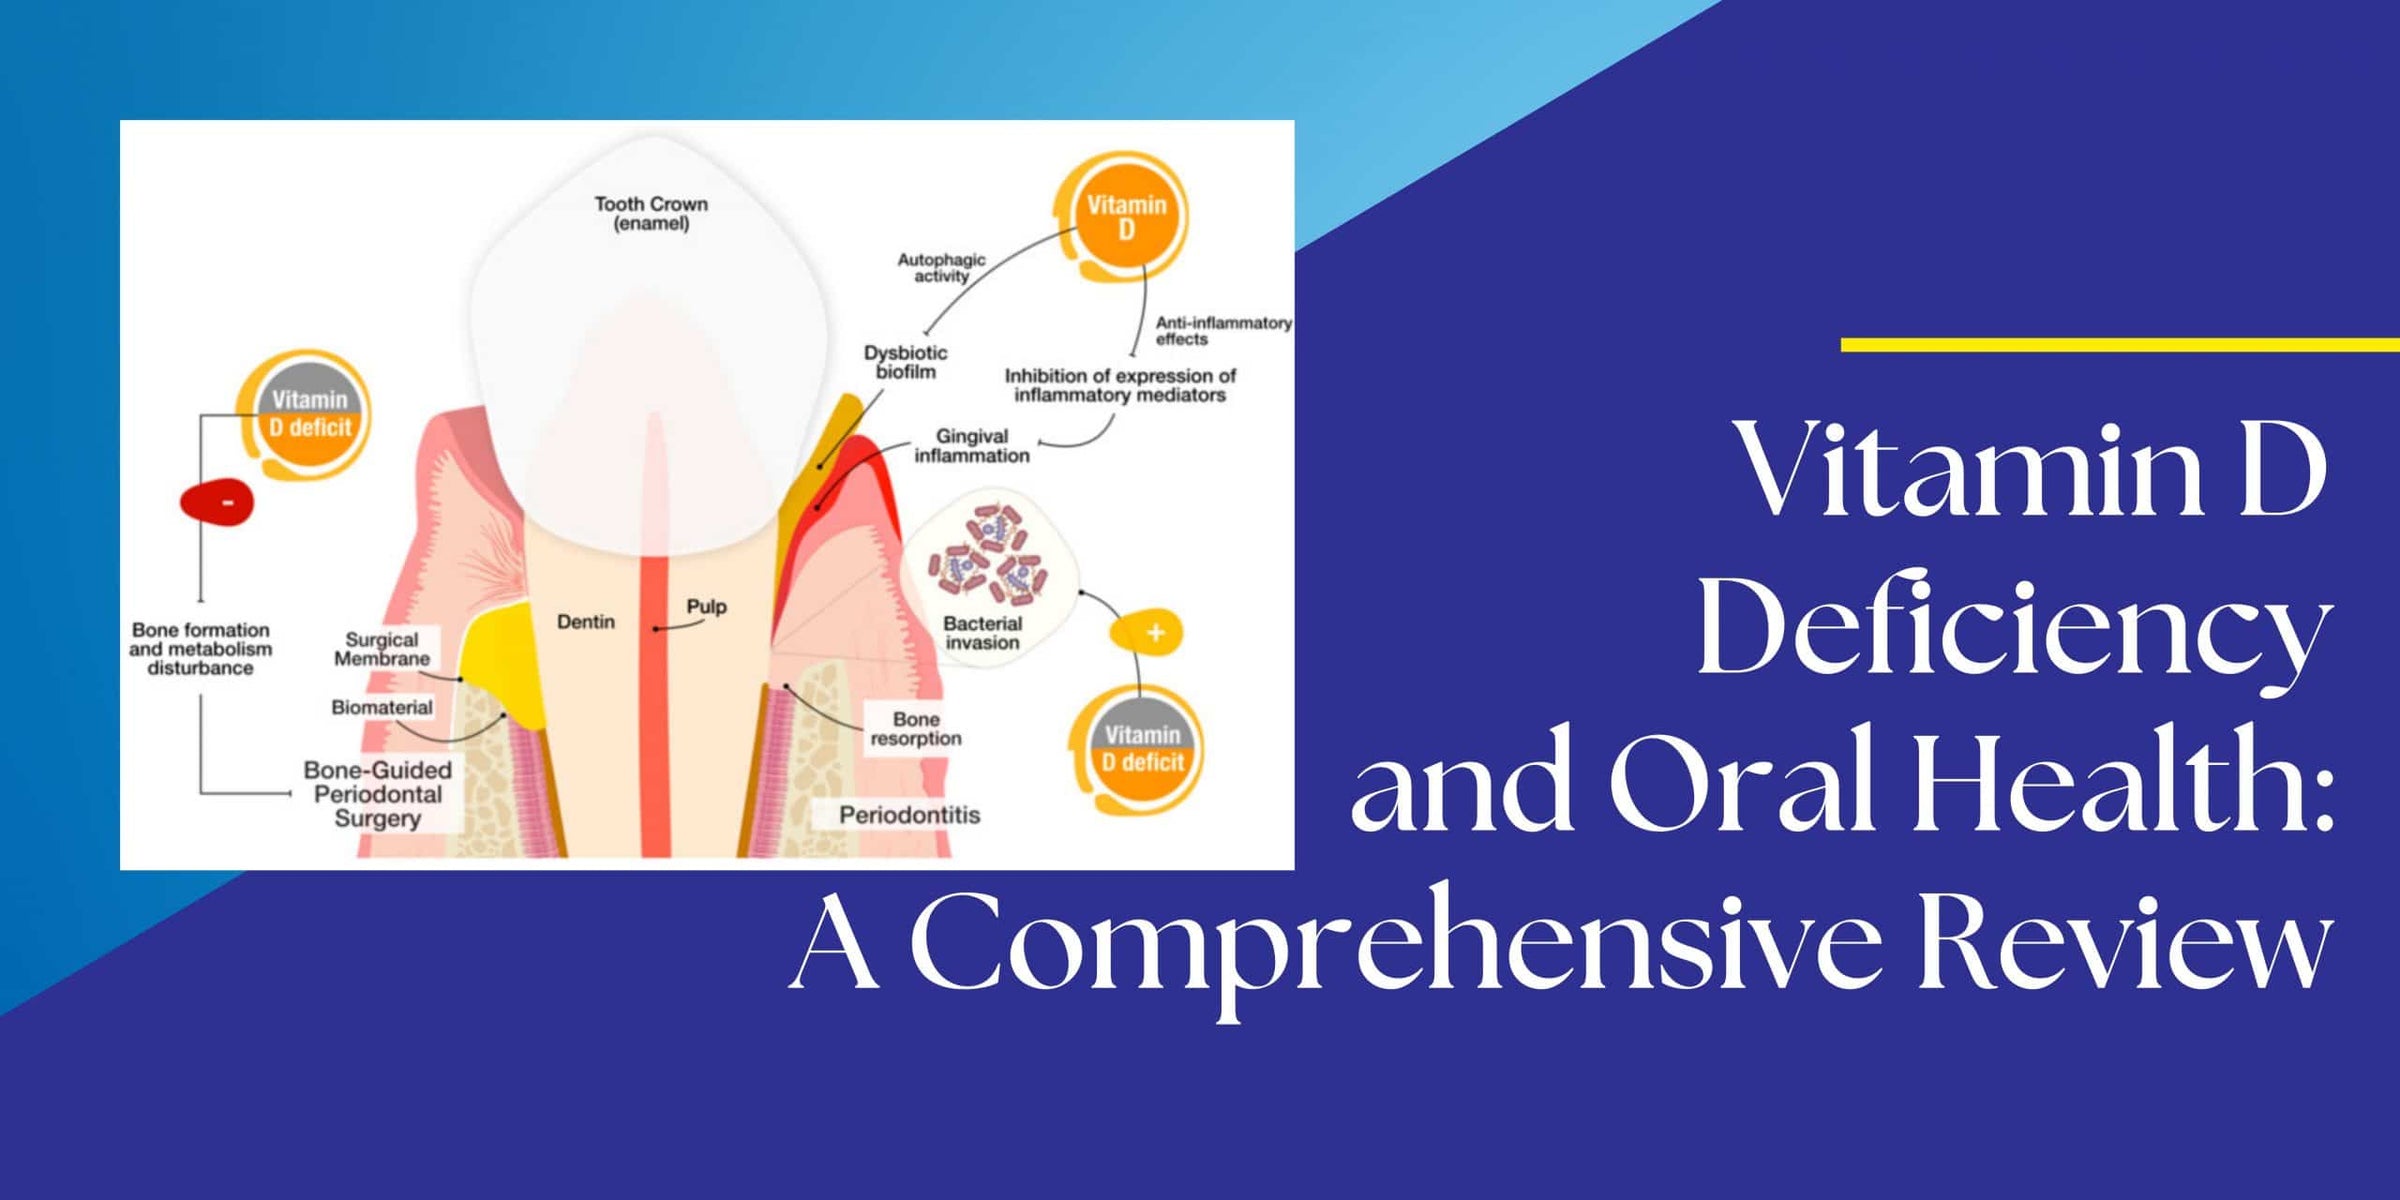 Vitamin D Deficiency and Oral Health: A Comprehensive Review Image